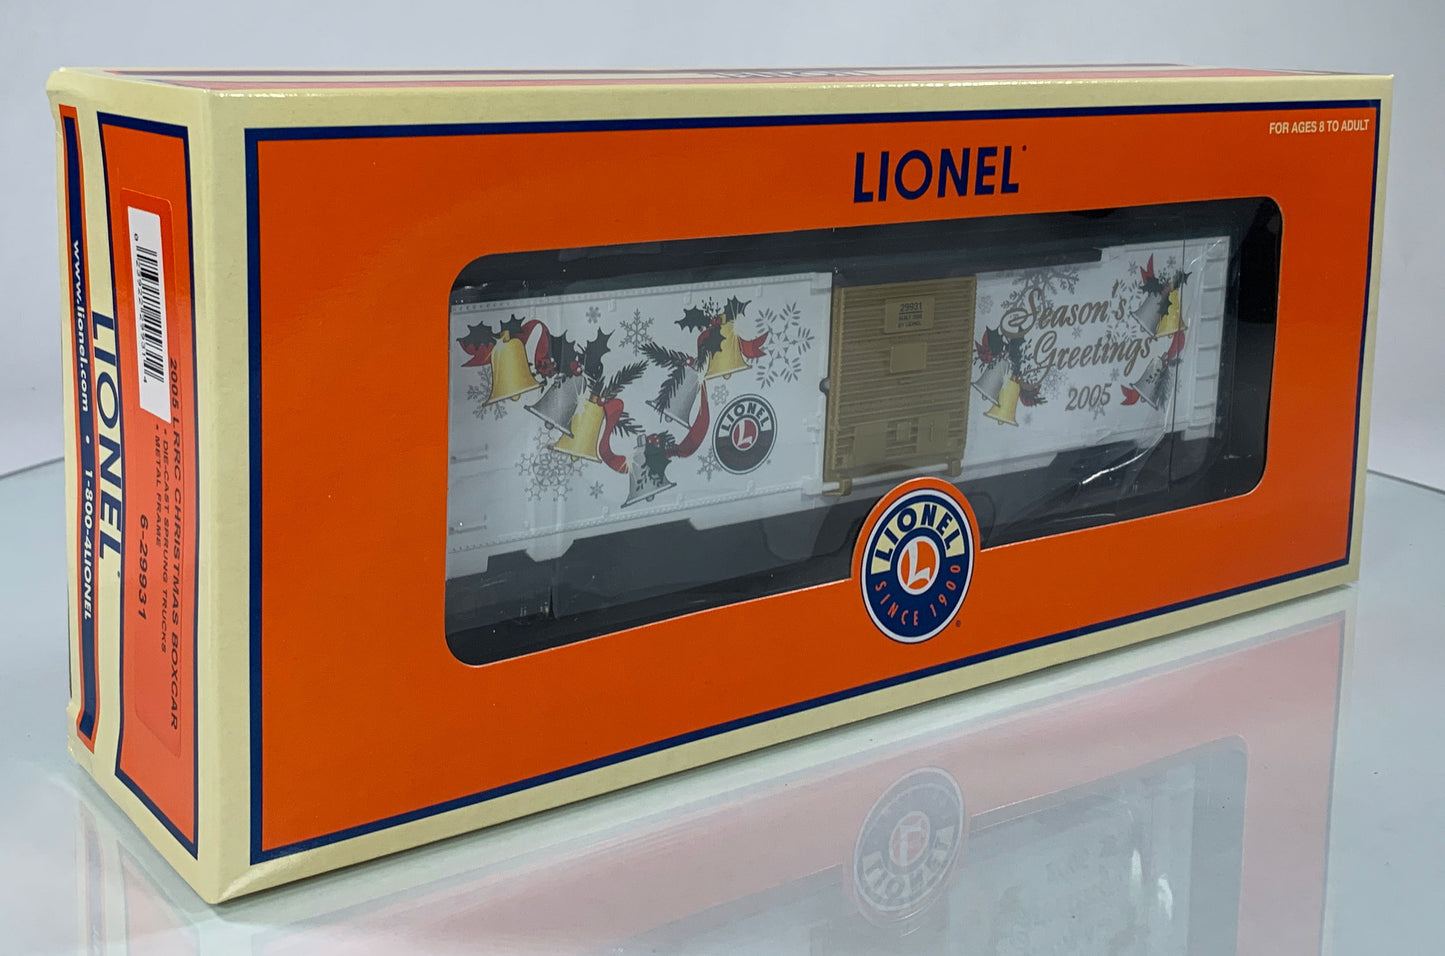 LIONEL • O GAUGE • 2005 LRRC Christmas Boxcar 6-29931 • NEW OLD STOCK